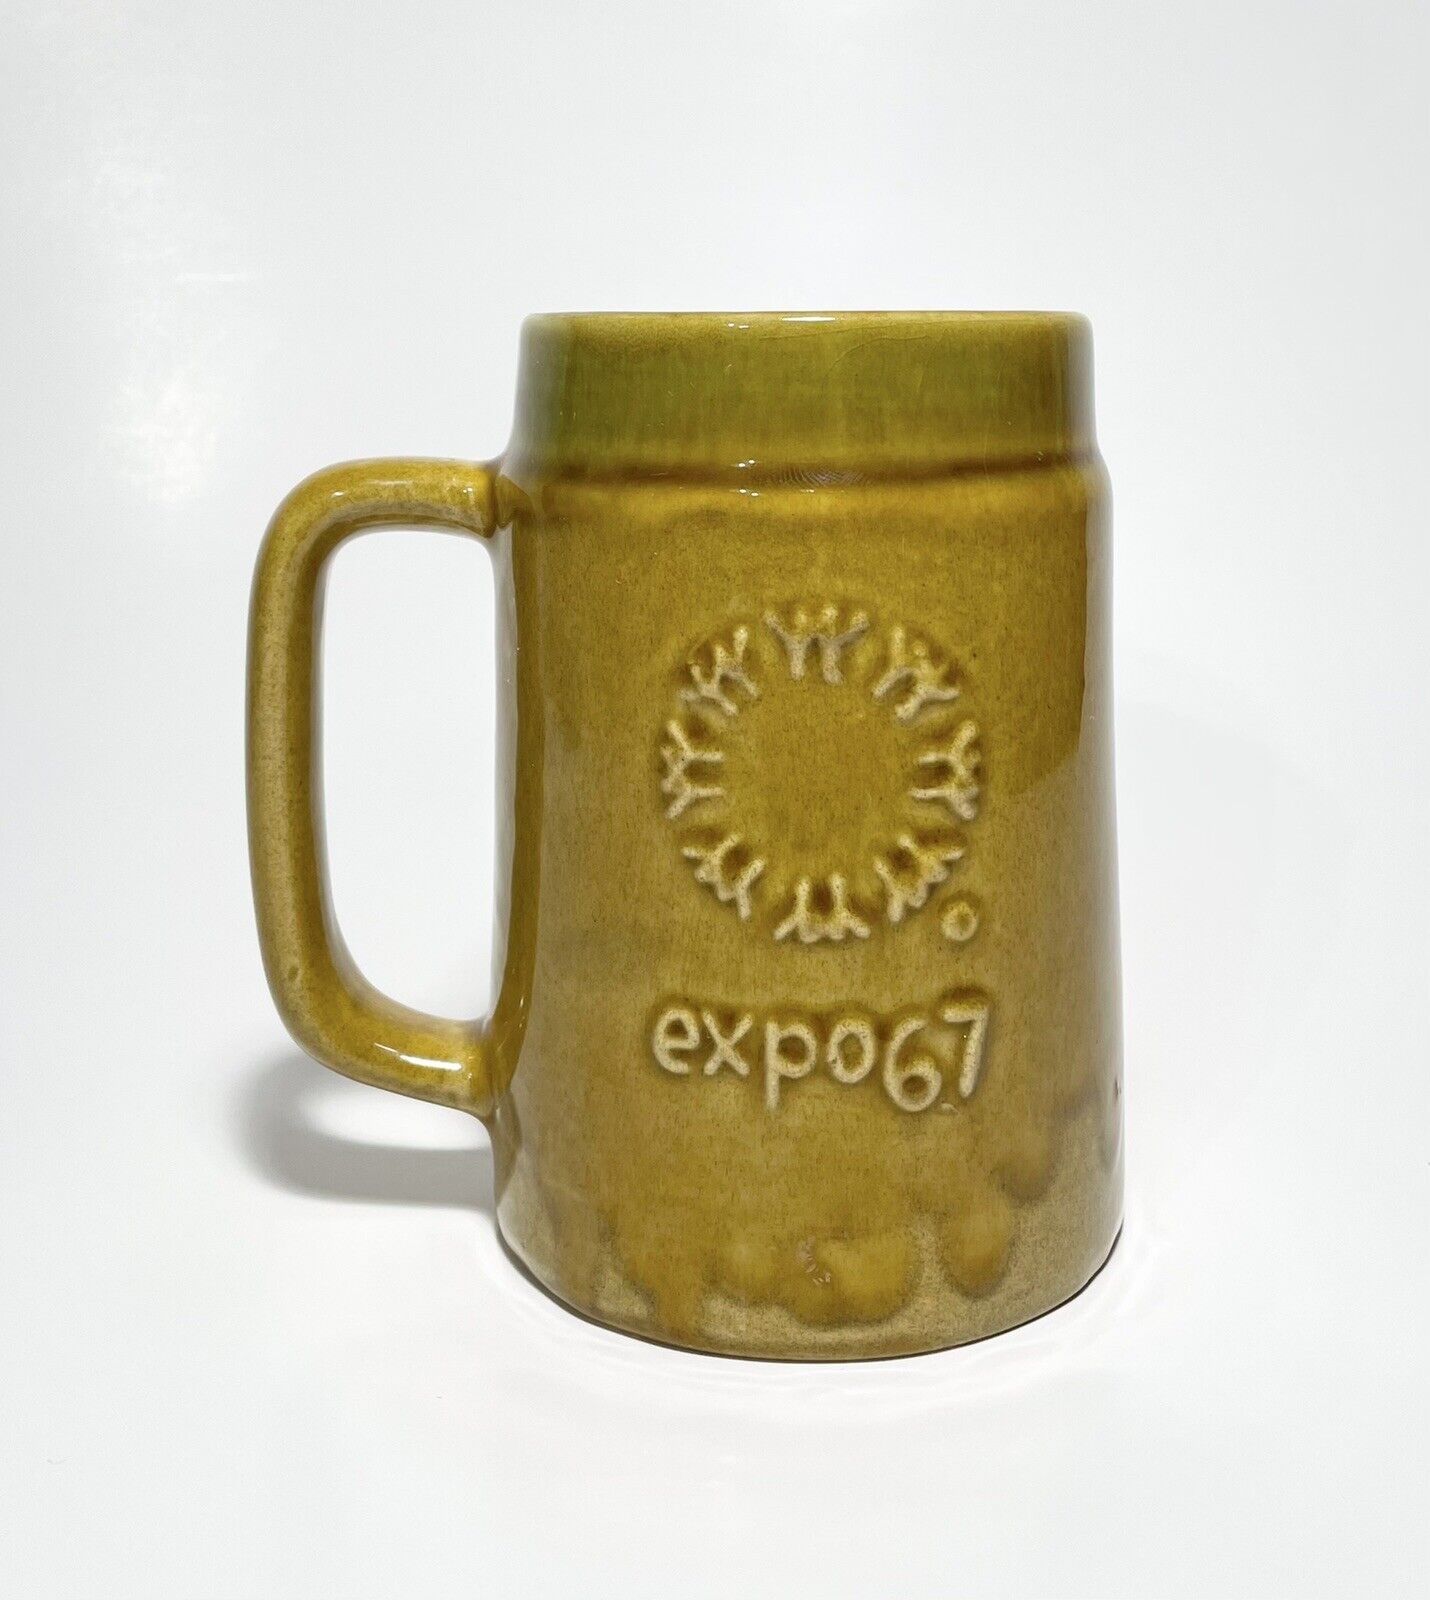 Vintage World's Fair Expo '67 Canada Beer Stein / Coffee Mug Butterscotch Color